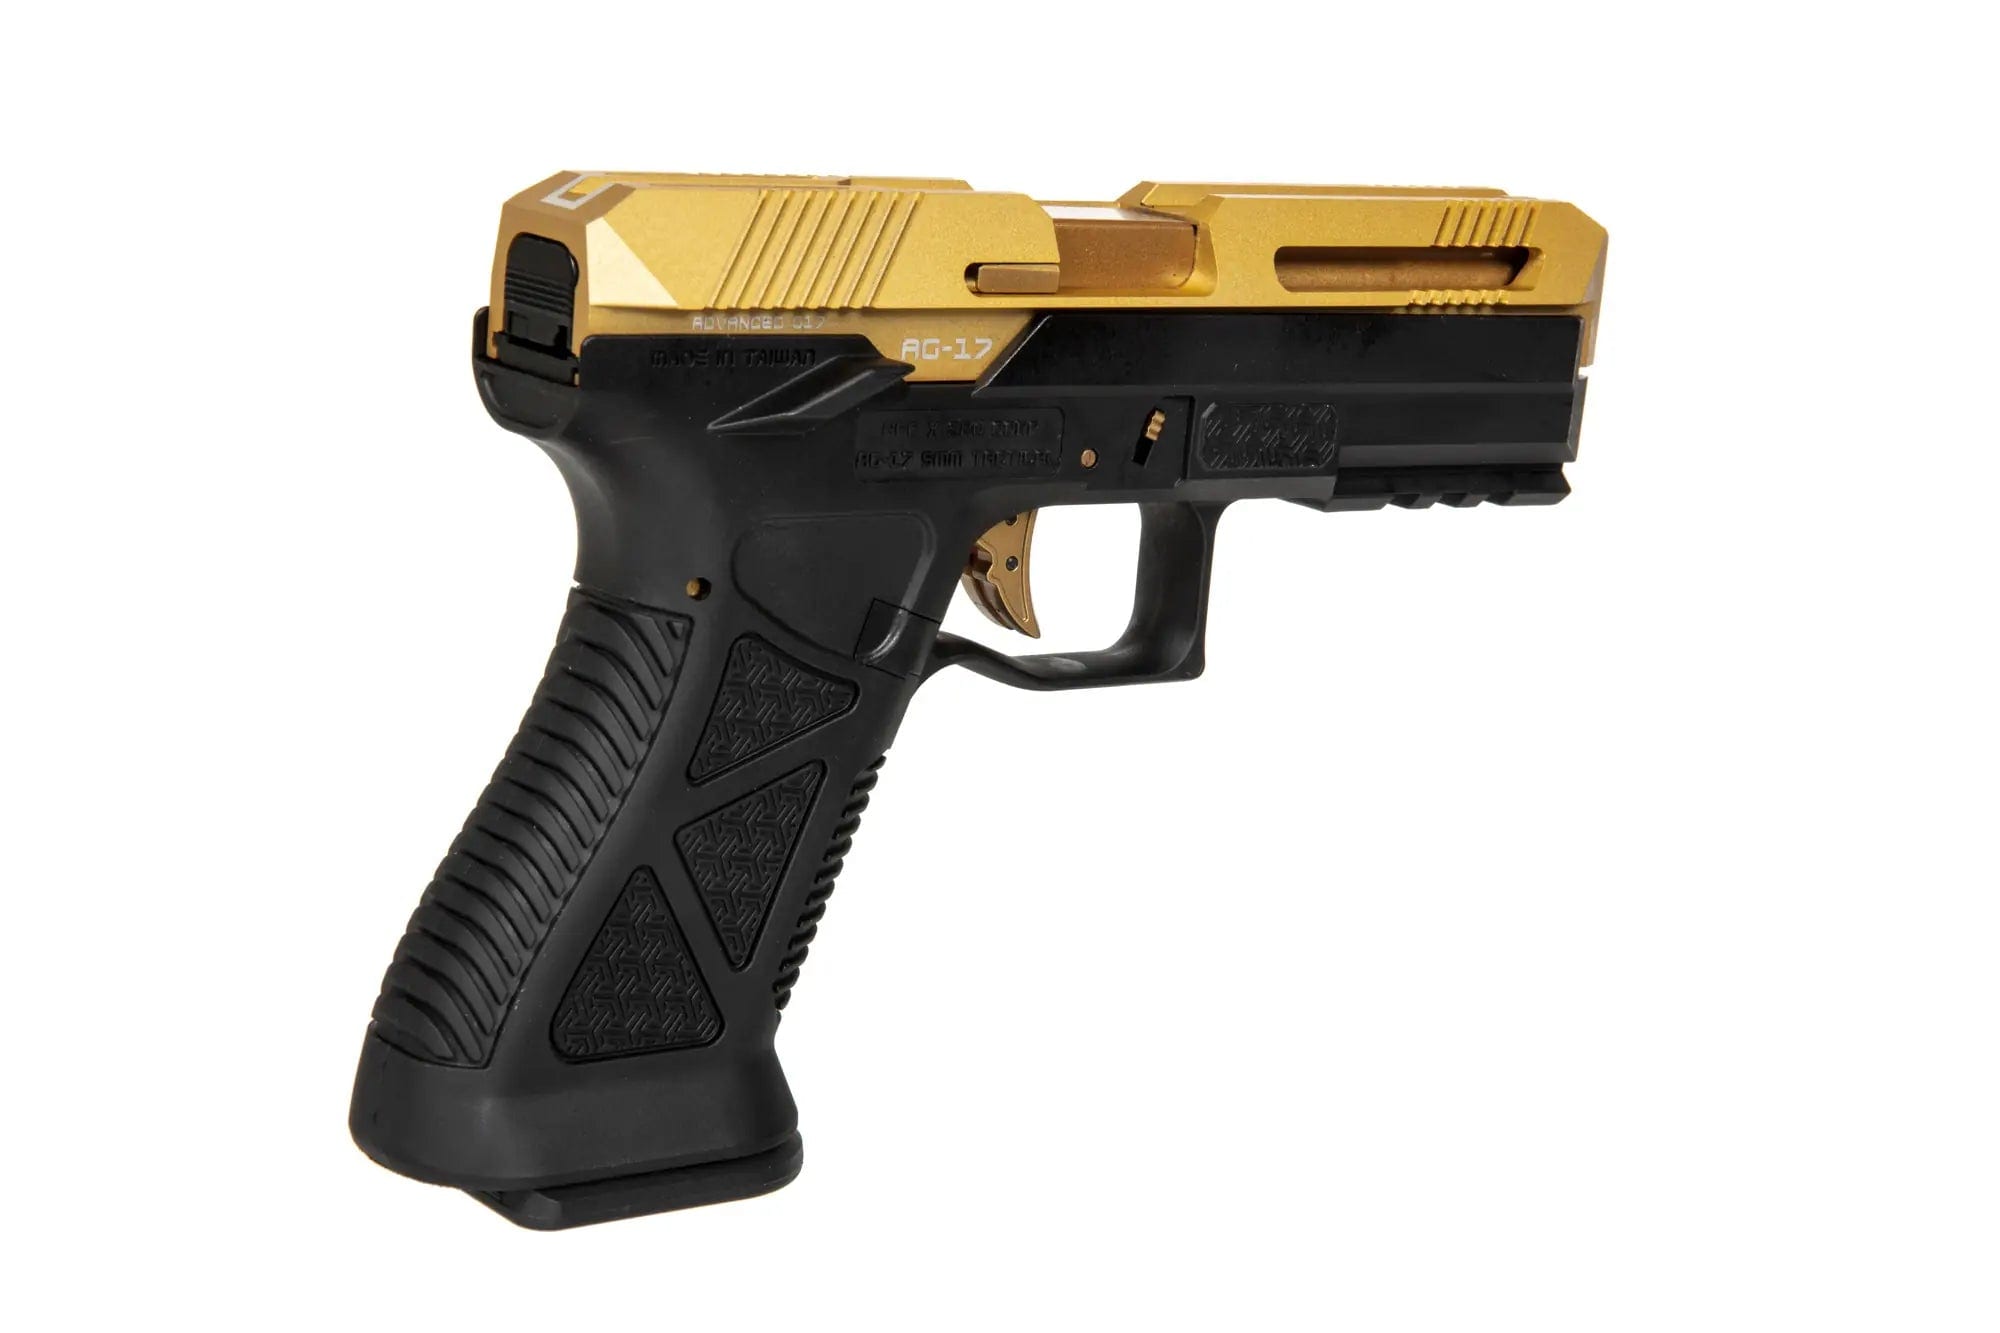 AG17 airsoft blowback pistol - gold and black